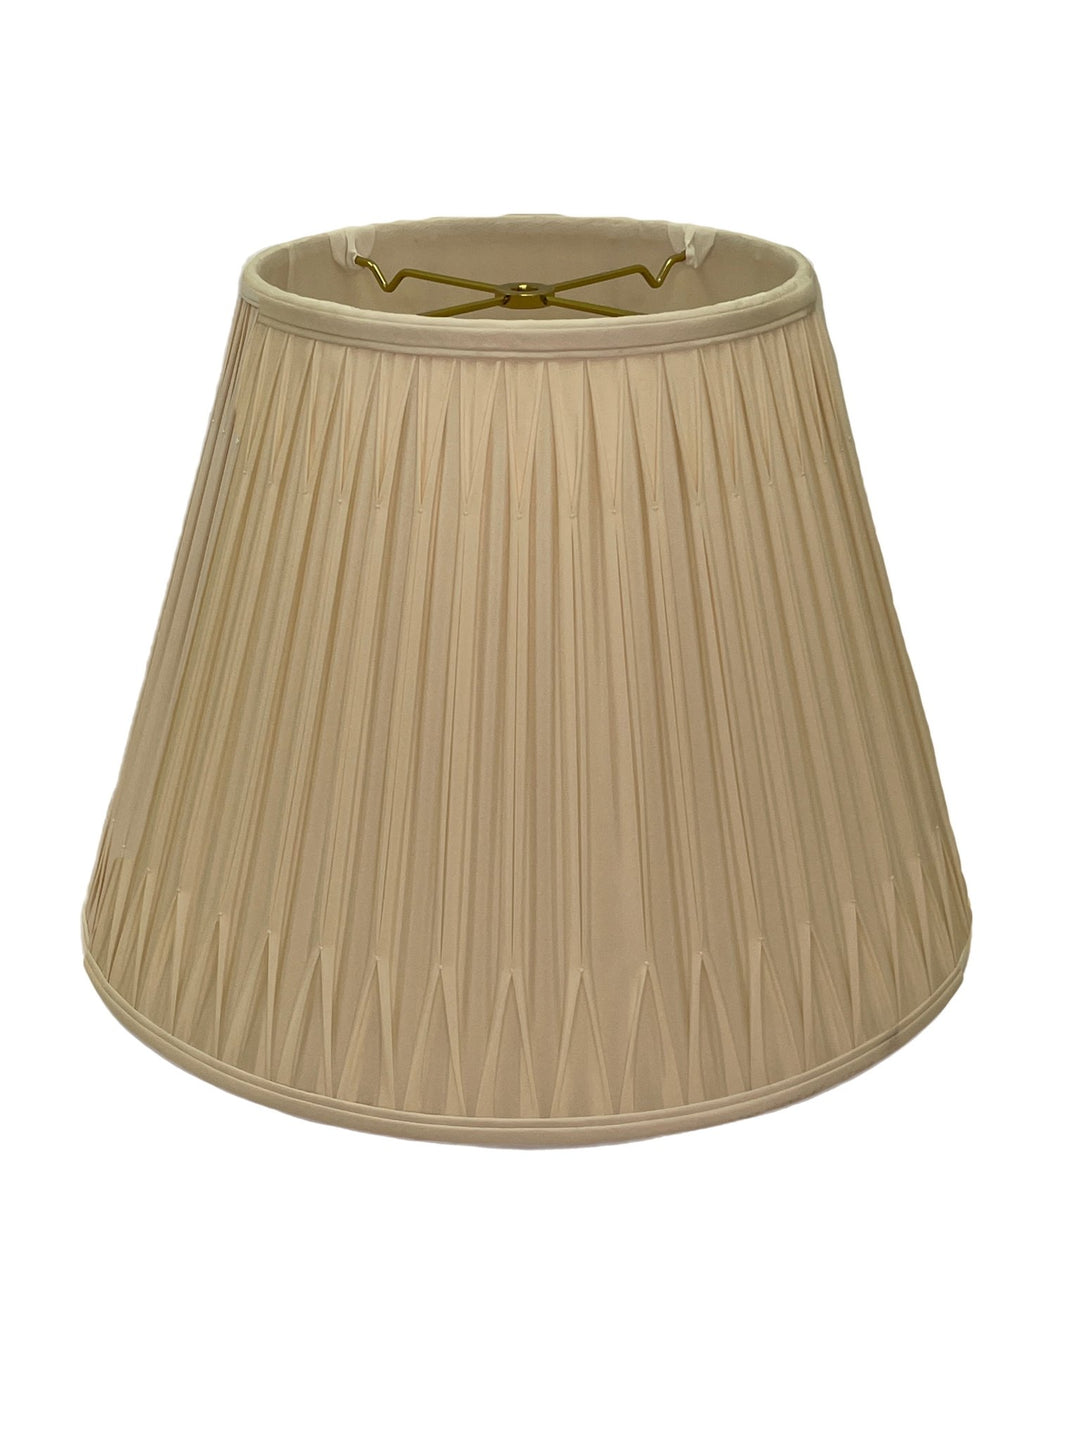 Smocked Pleat Silk Empire Shades - Multiple sizes and colors - Lux Lamp Shades